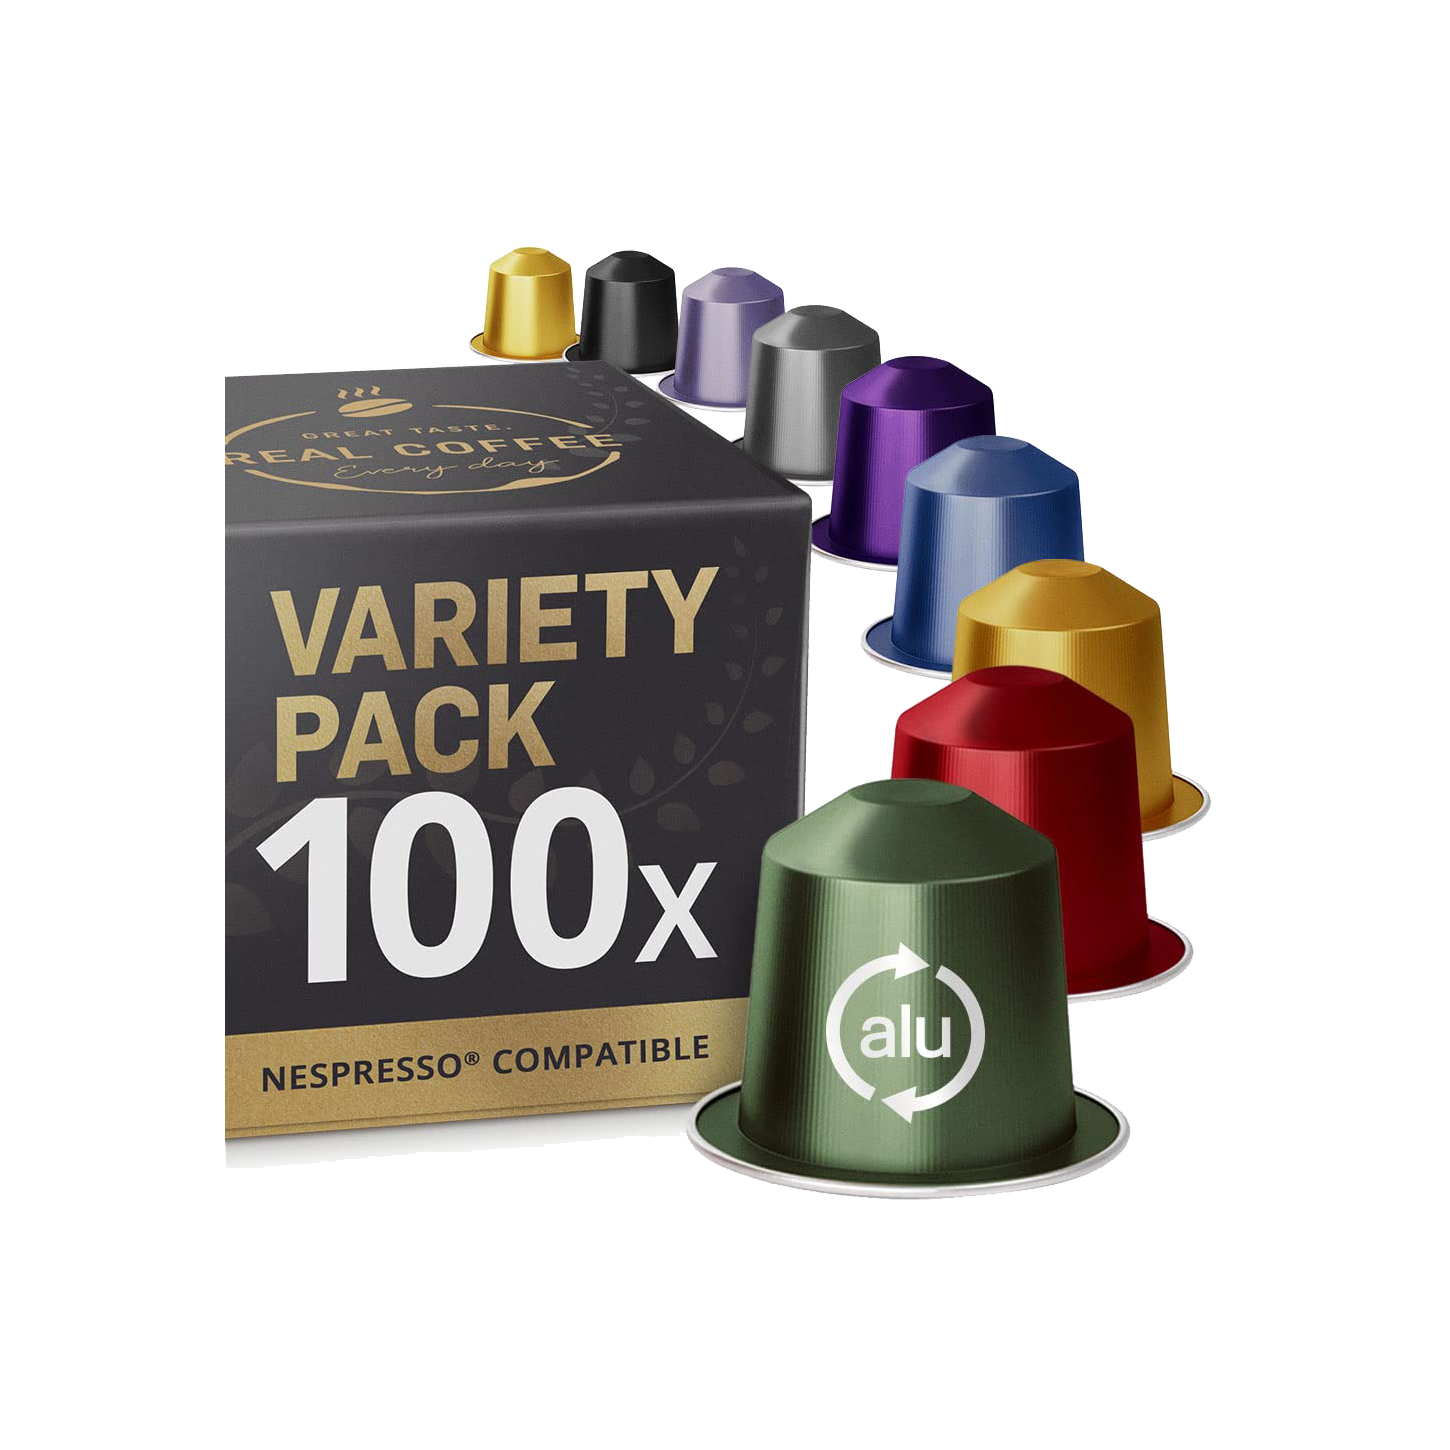 Nespresso Compatible Pods Mixed Variety Pack): Gift Idea For